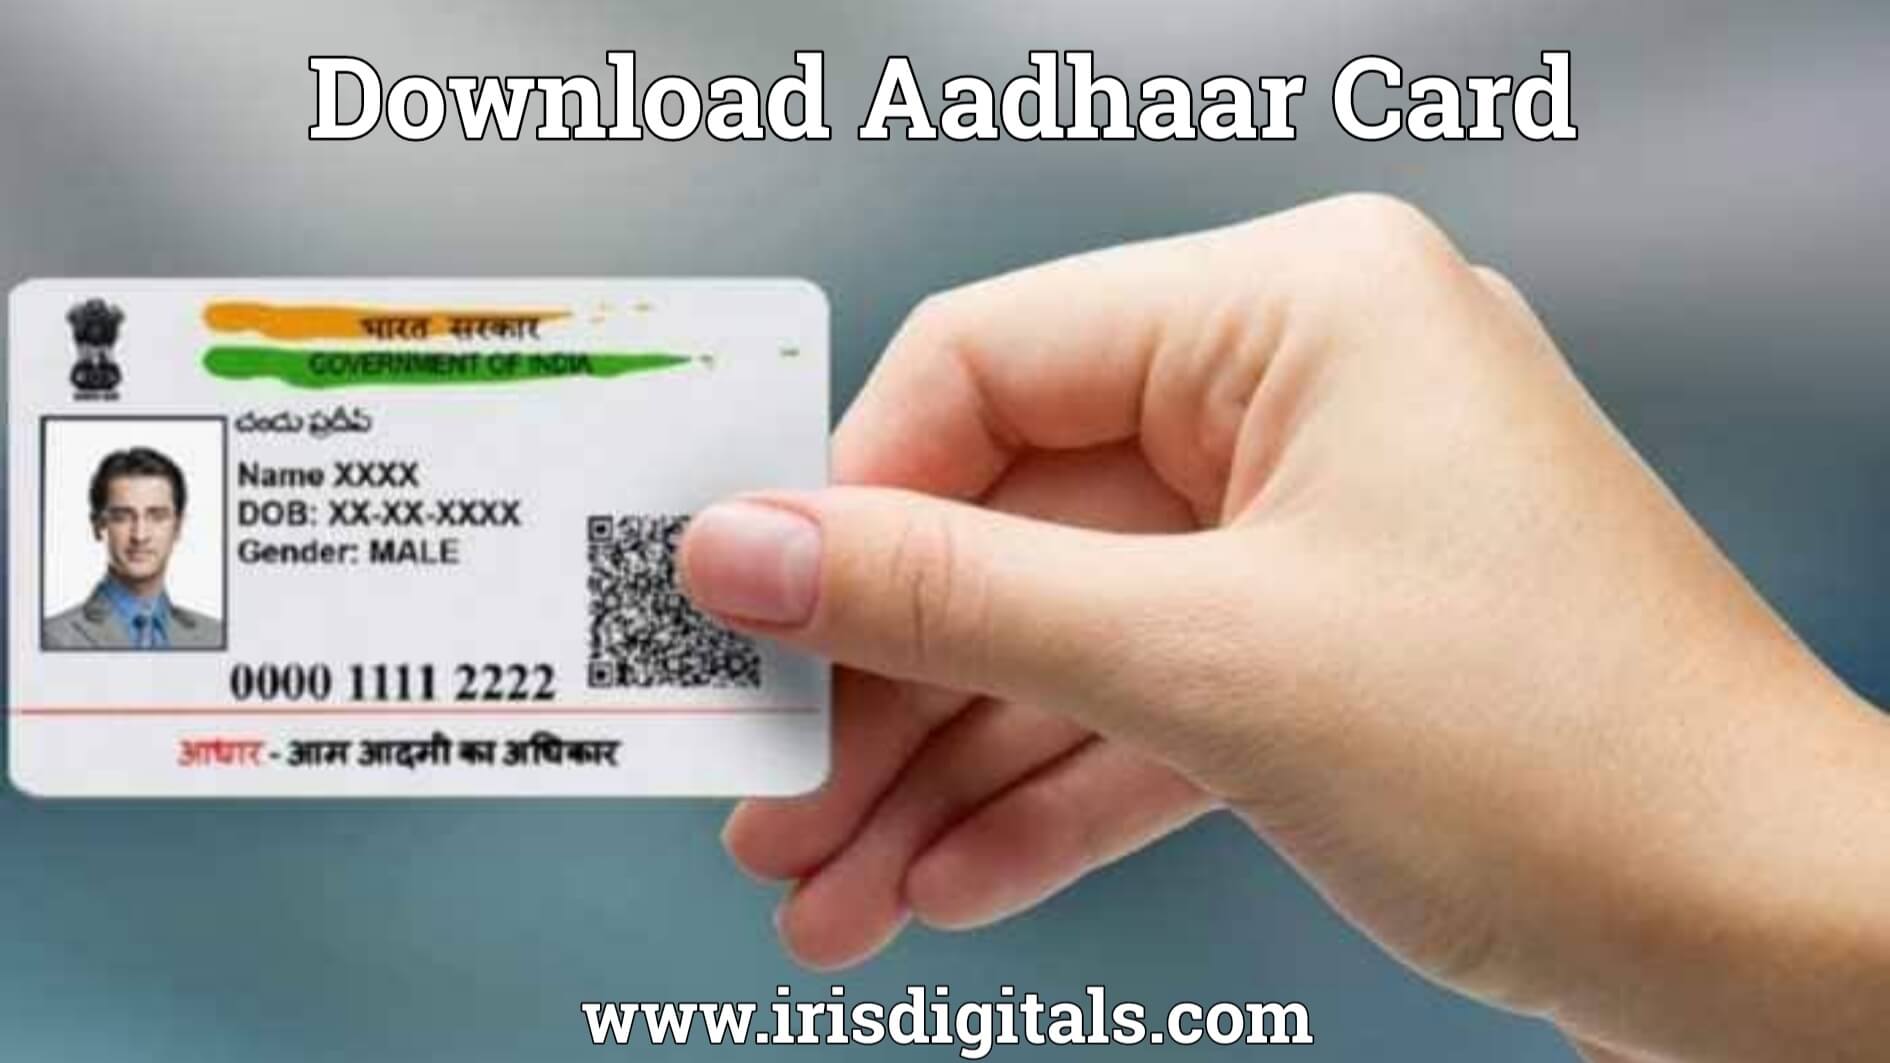 Download Aadhaar Card From Official Website On Your Phone